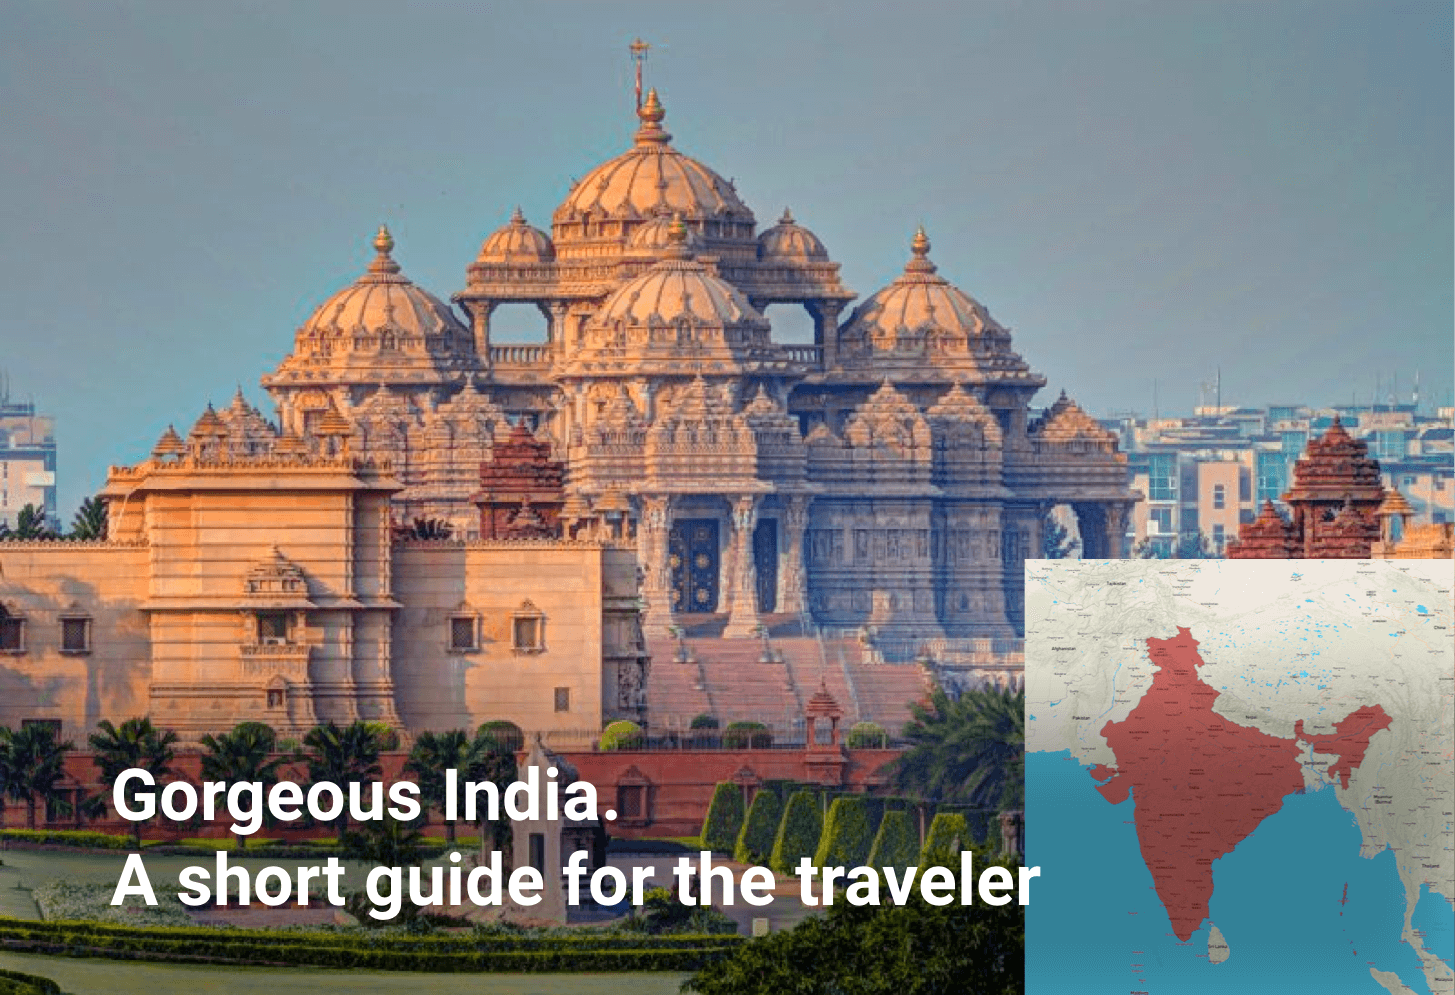 Gorgeous India. A short guide for the traveler